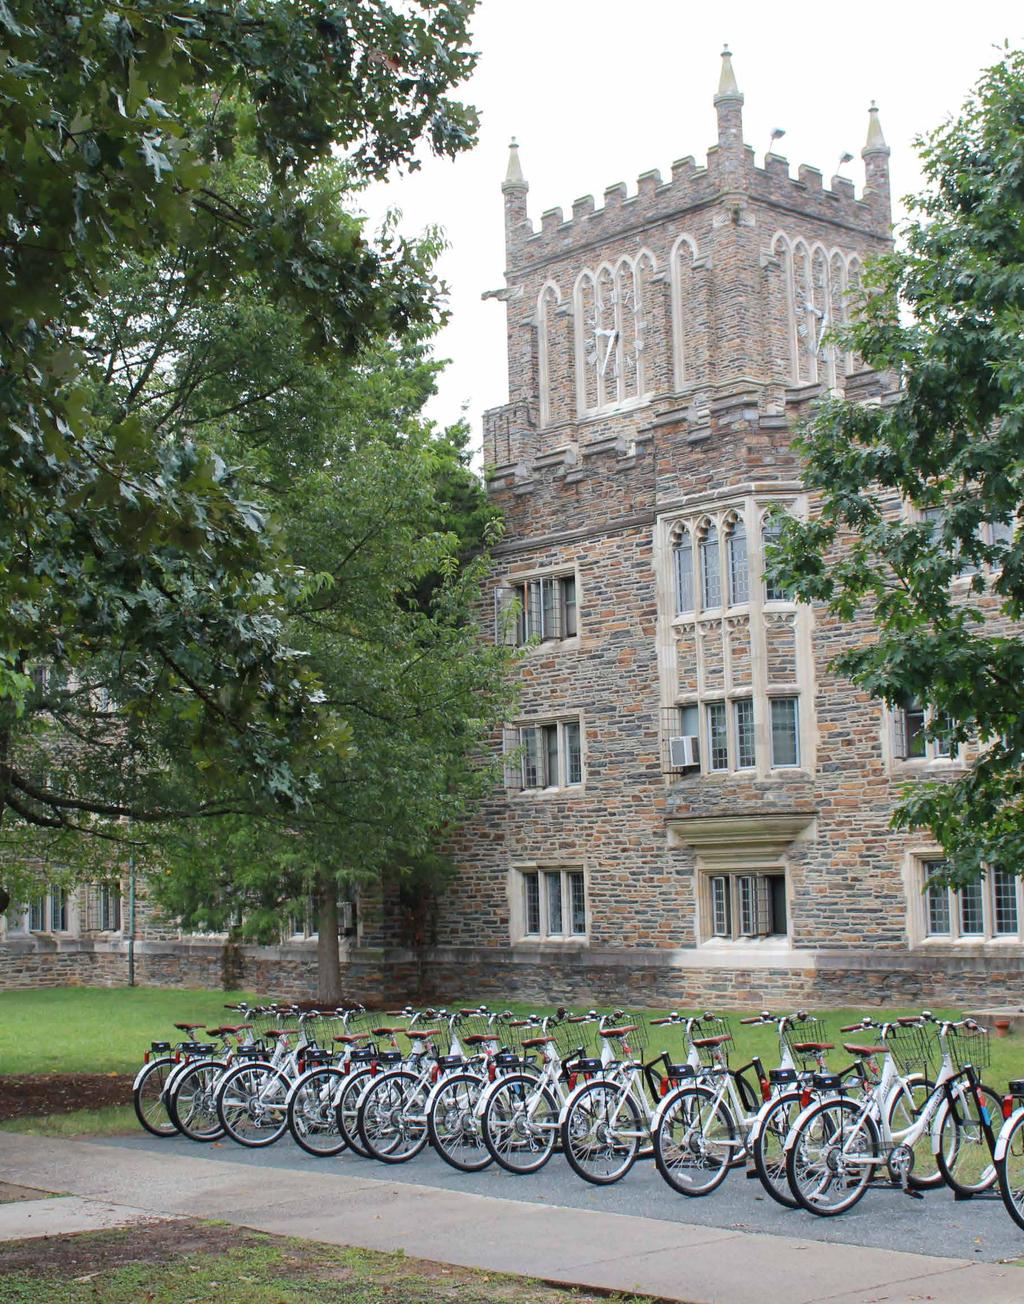 19 90% of new launches in 2014 & 2015 Zagster's bike share expertise is trusted by campuses.